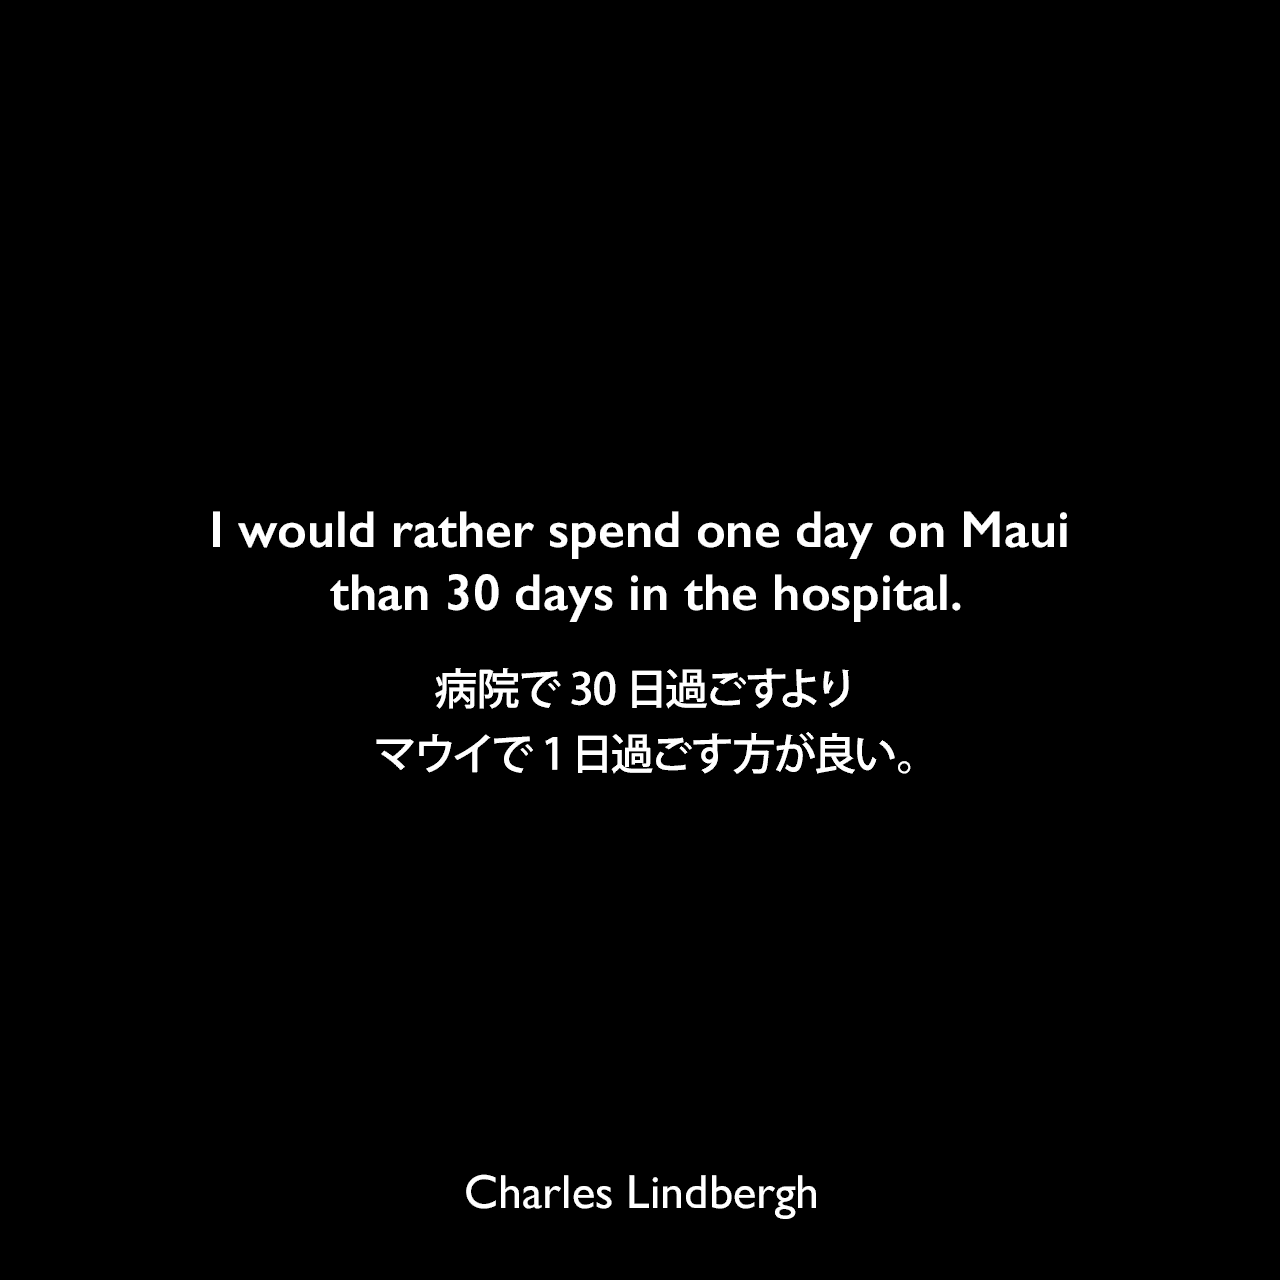 I would rather spend one day on Maui than 30 days in the hospital.病院で30日過ごすよりマウイで1日過ごす方が良い。Charles Lindbergh